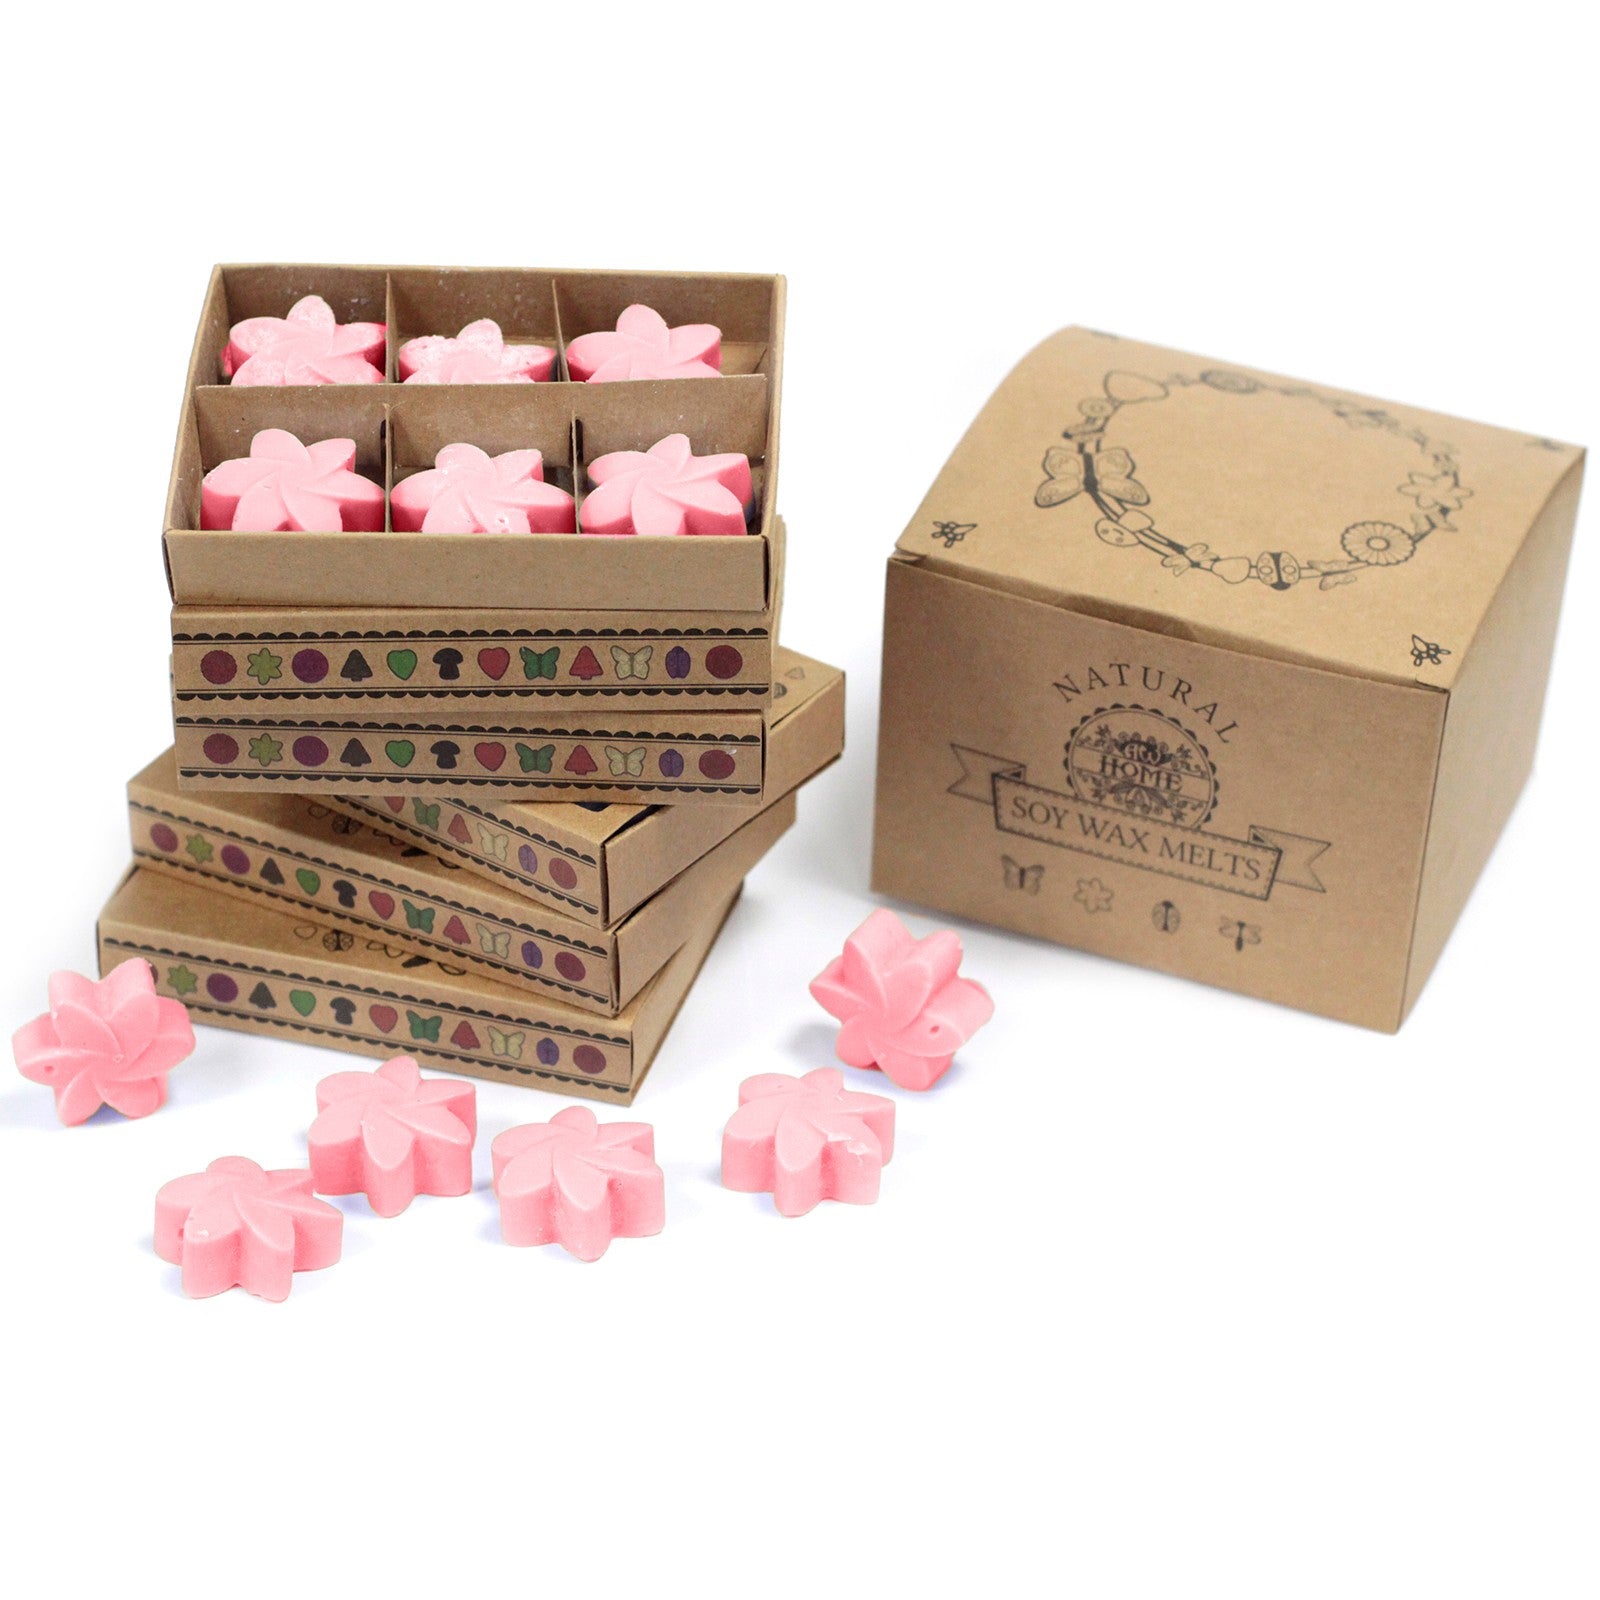 View Box of 6 Wax Melts Classic Rose information